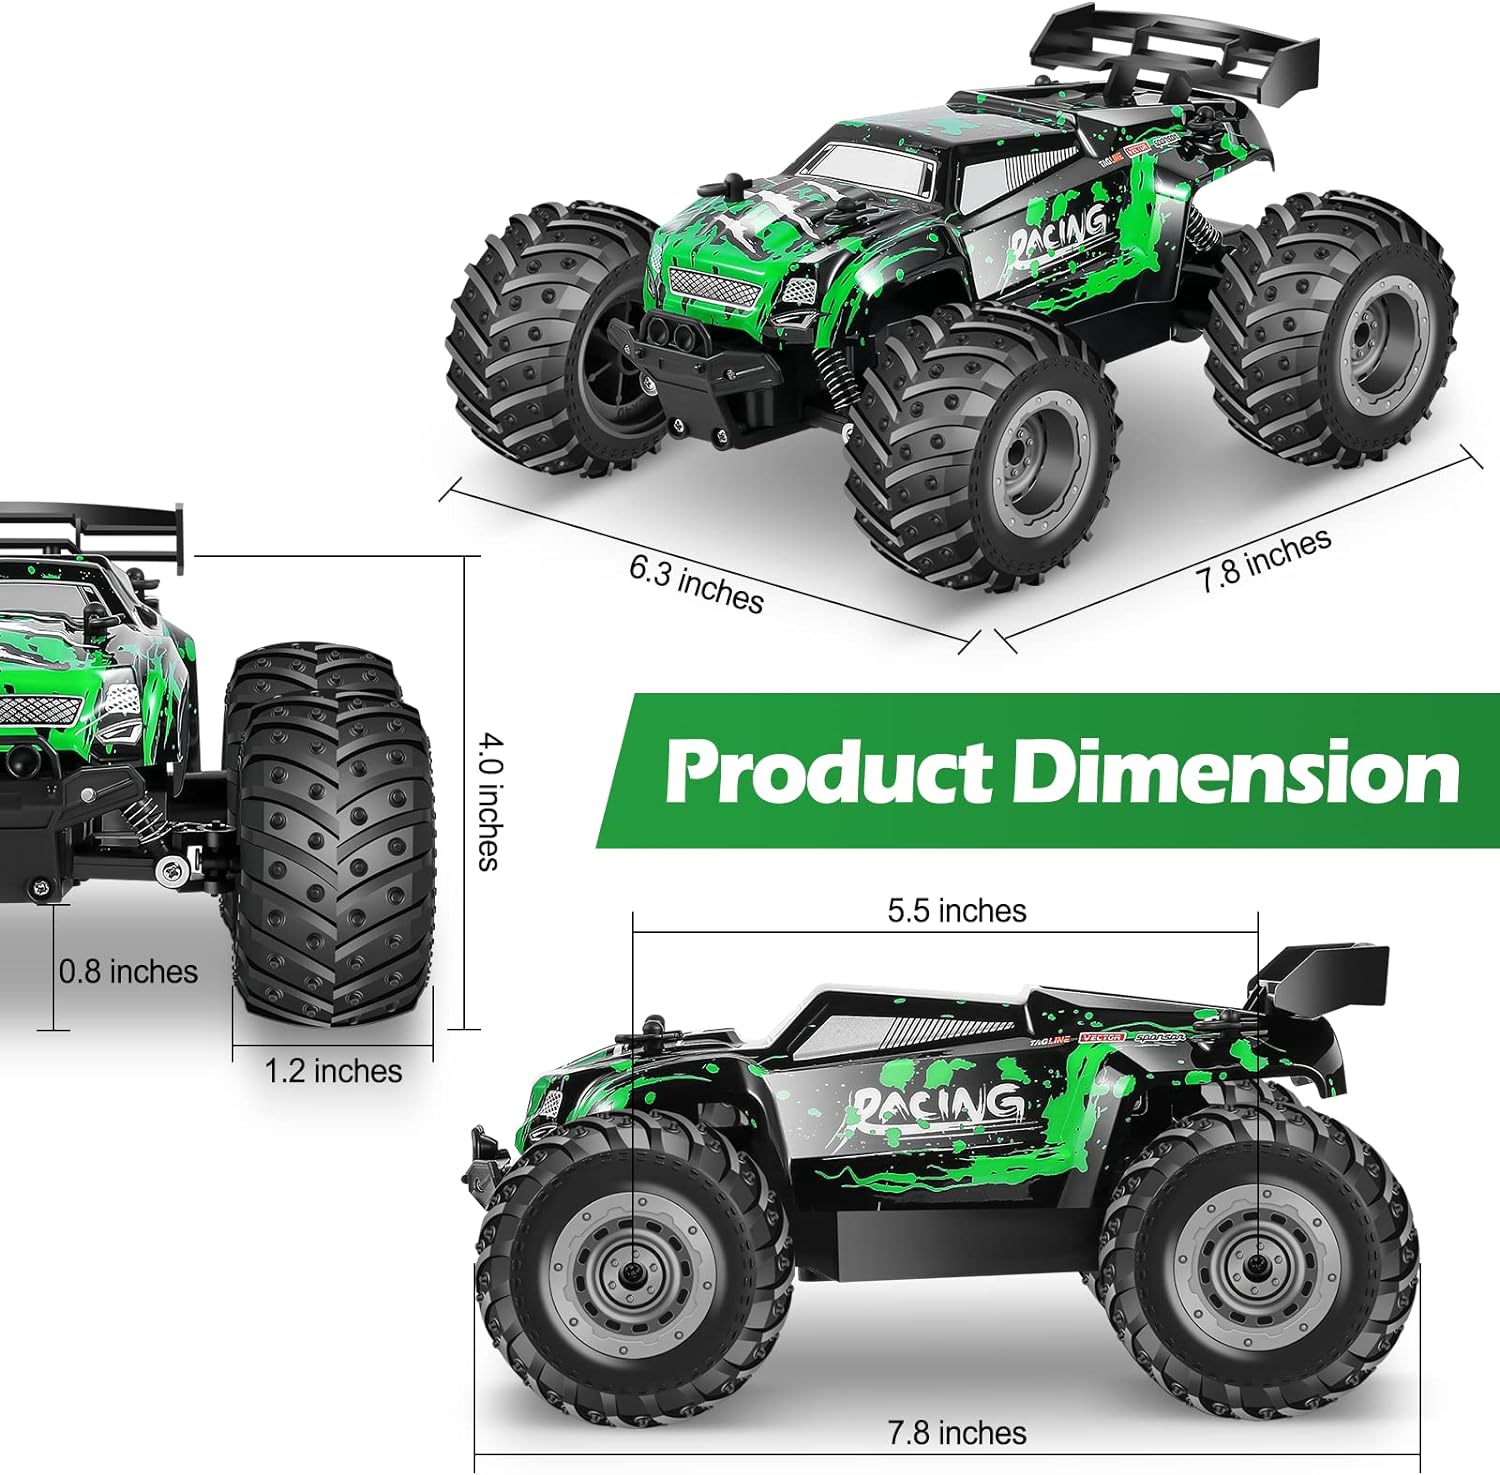 Rcjoyou RC Cars,All Terrain Remote Control Car,2WD 2.4 GHz Off Road High Speed 20 Km/h RC Monster Truck Racing Cars with LED Headlight and Two Batteries, Xmas Gifts for Kid and Adults